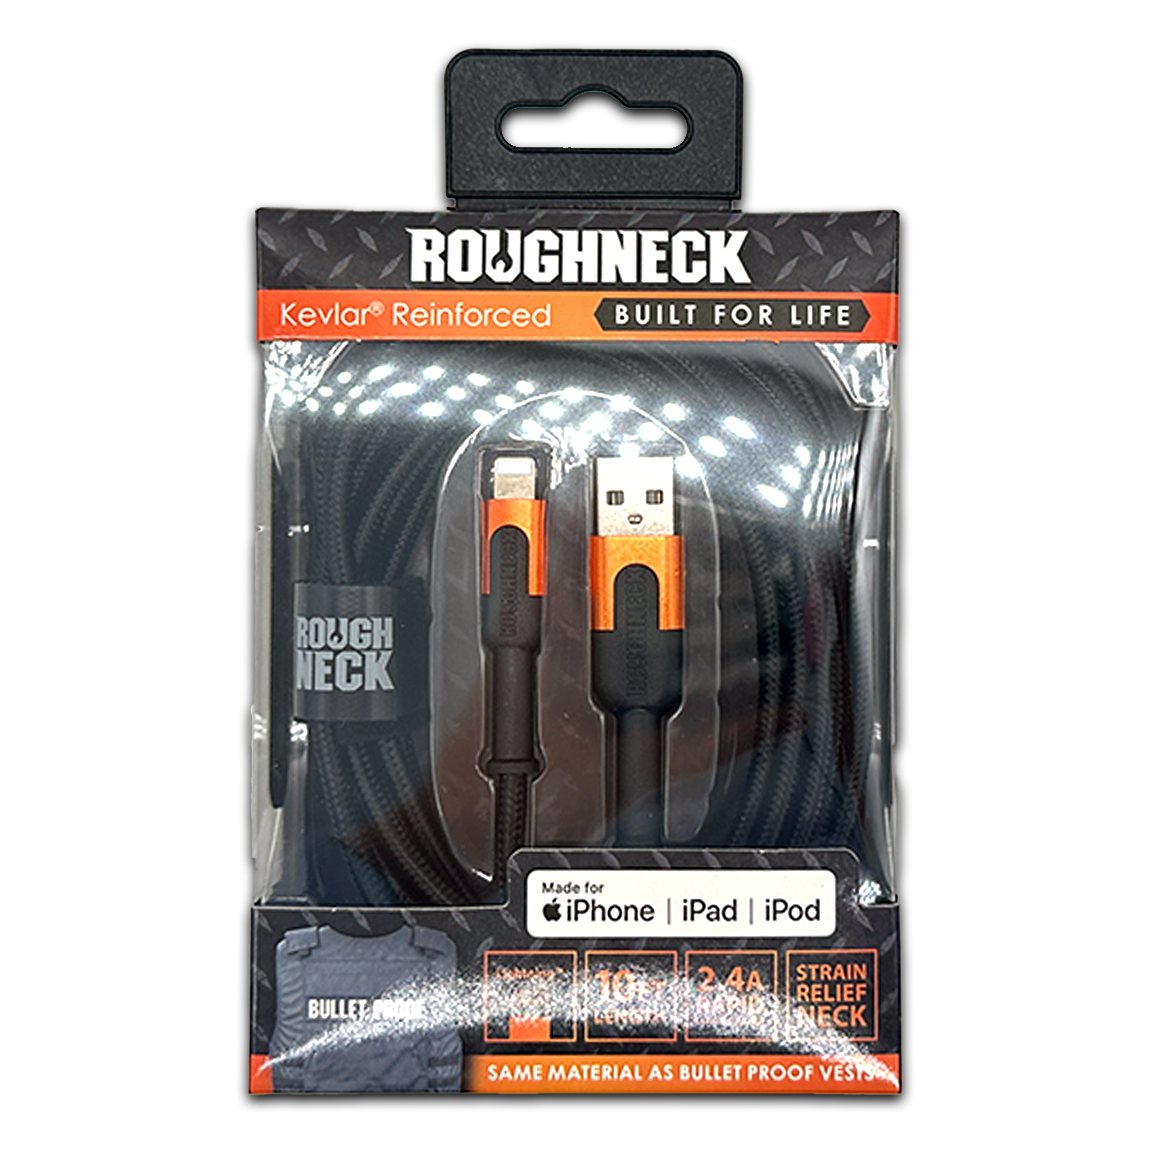 ITEM NUMBER 041594 ROUGHNECK 10FT USB-TO-LIGHTNING CABLE 4 PIECES PER PACK